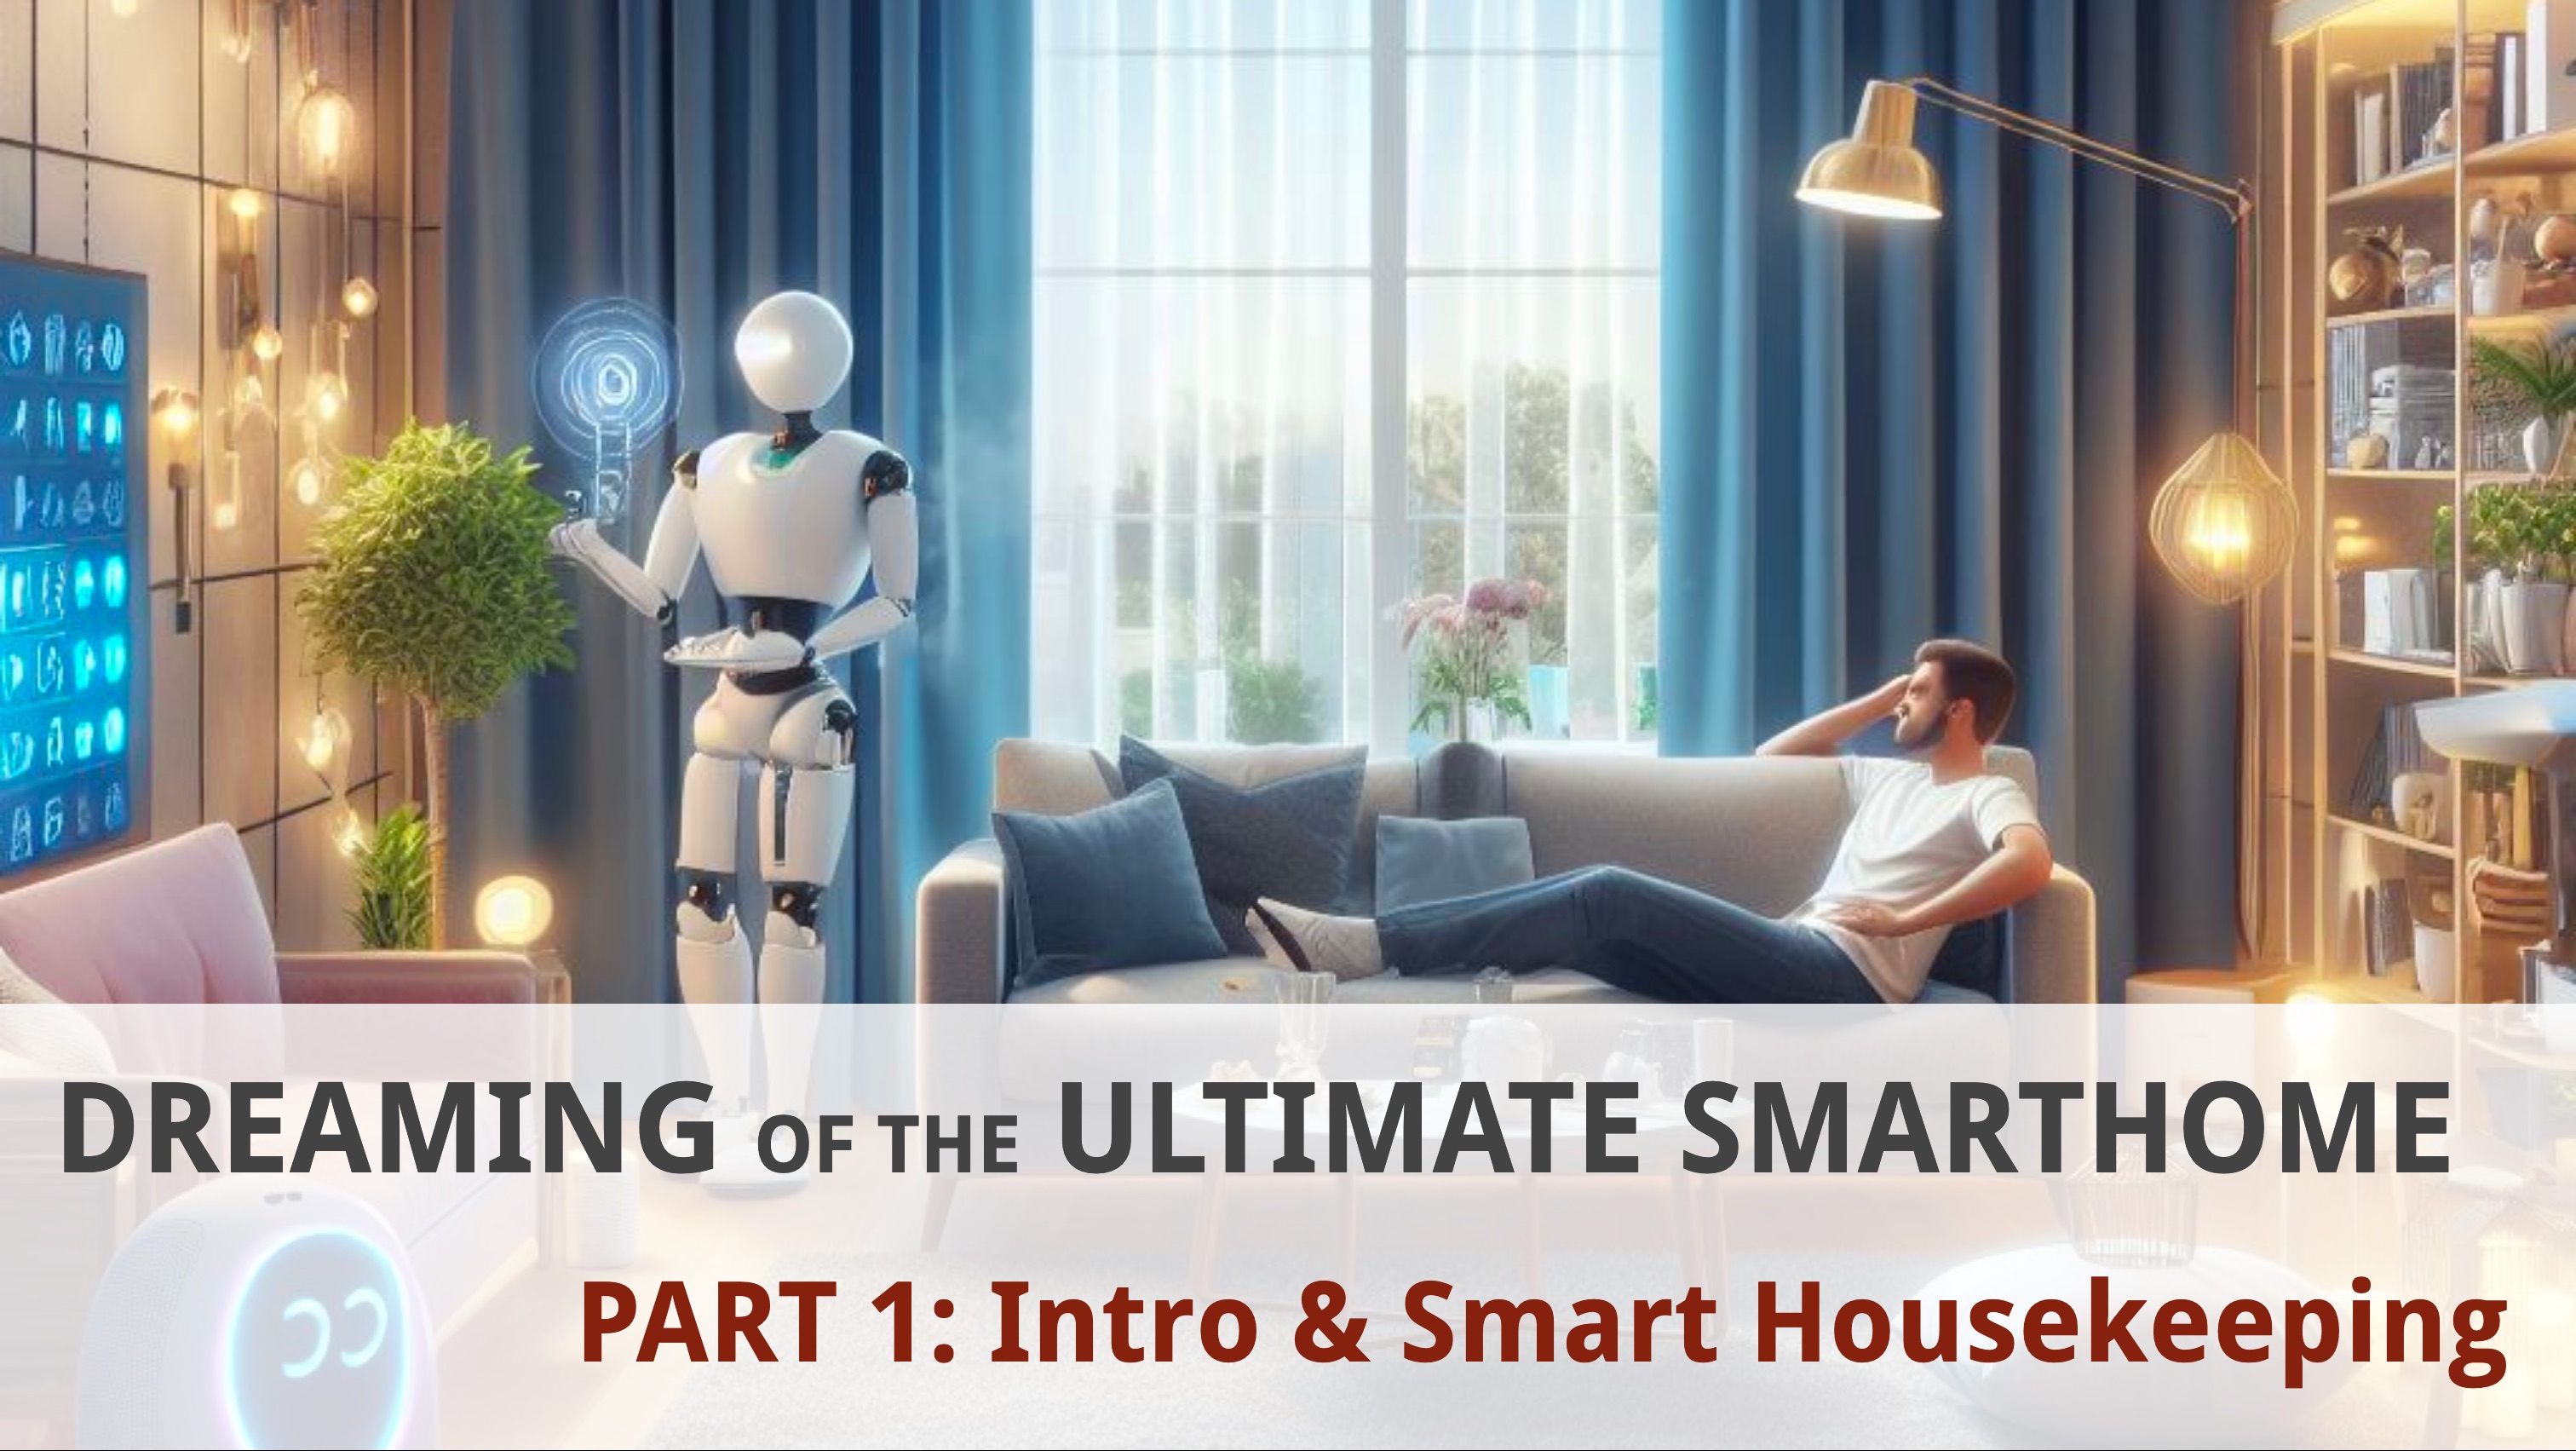 [Dreaming of the Ultimate Smarthome (Part 1)](/posts/dreaming-of-the-ultimate-smarthome-part-1/): Part 2 of this series is about 70% done. I had planned to publish this in December but life got in the way. Hopefully soon!